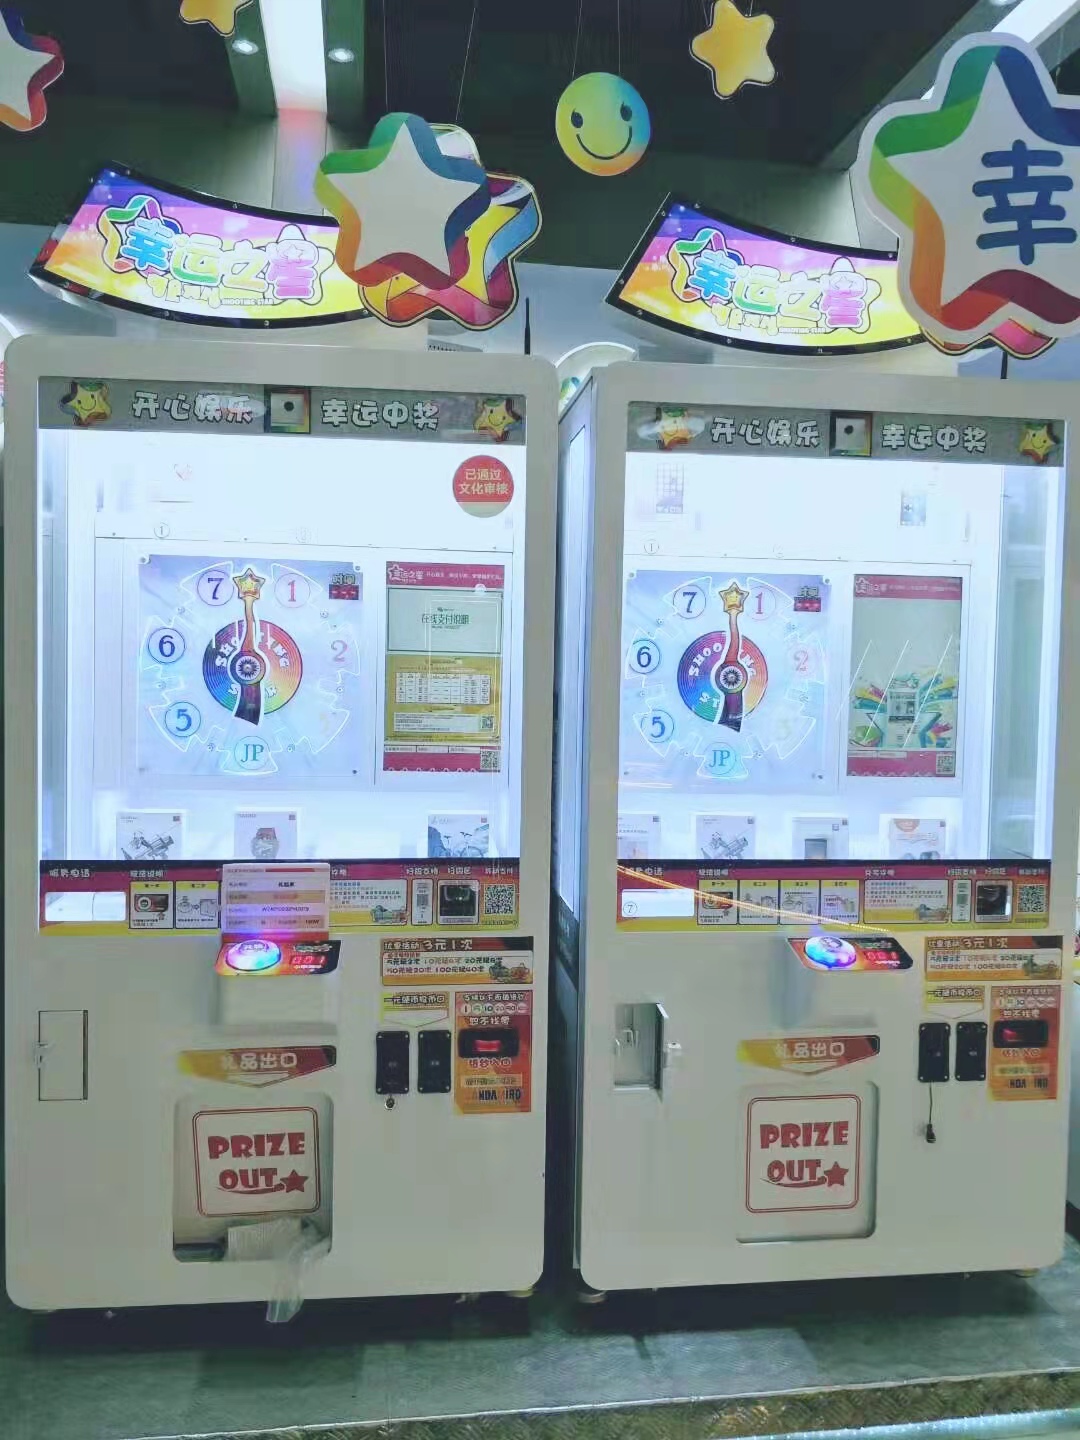 95% New Second Hand Andamiro Gifts Vending Lucky Star Crazy Toy Game Clip Machines Prize Cutting Automatic Gift Game Machine